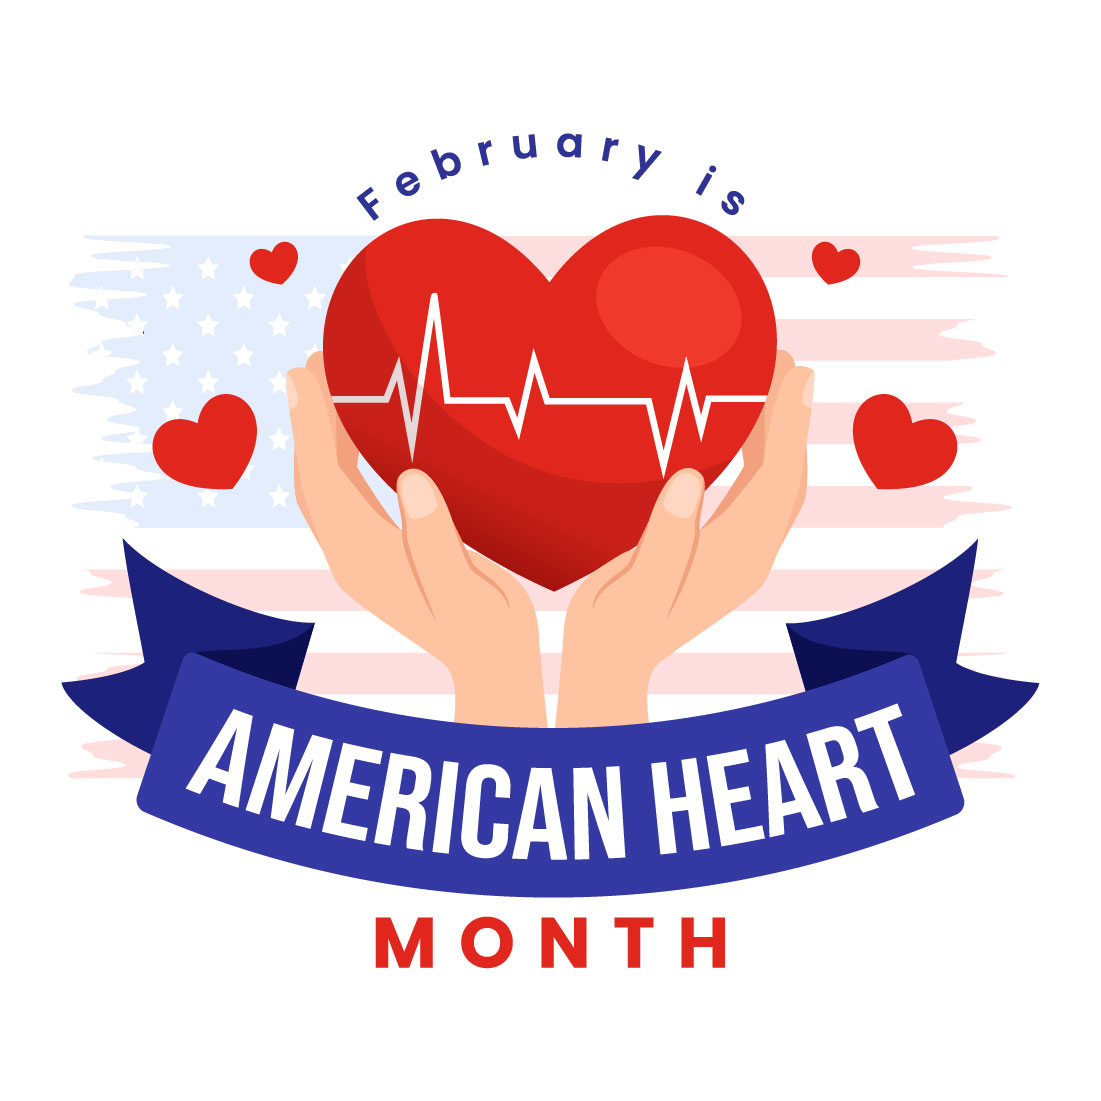 16 February is American Heart Month Illustration cover image.